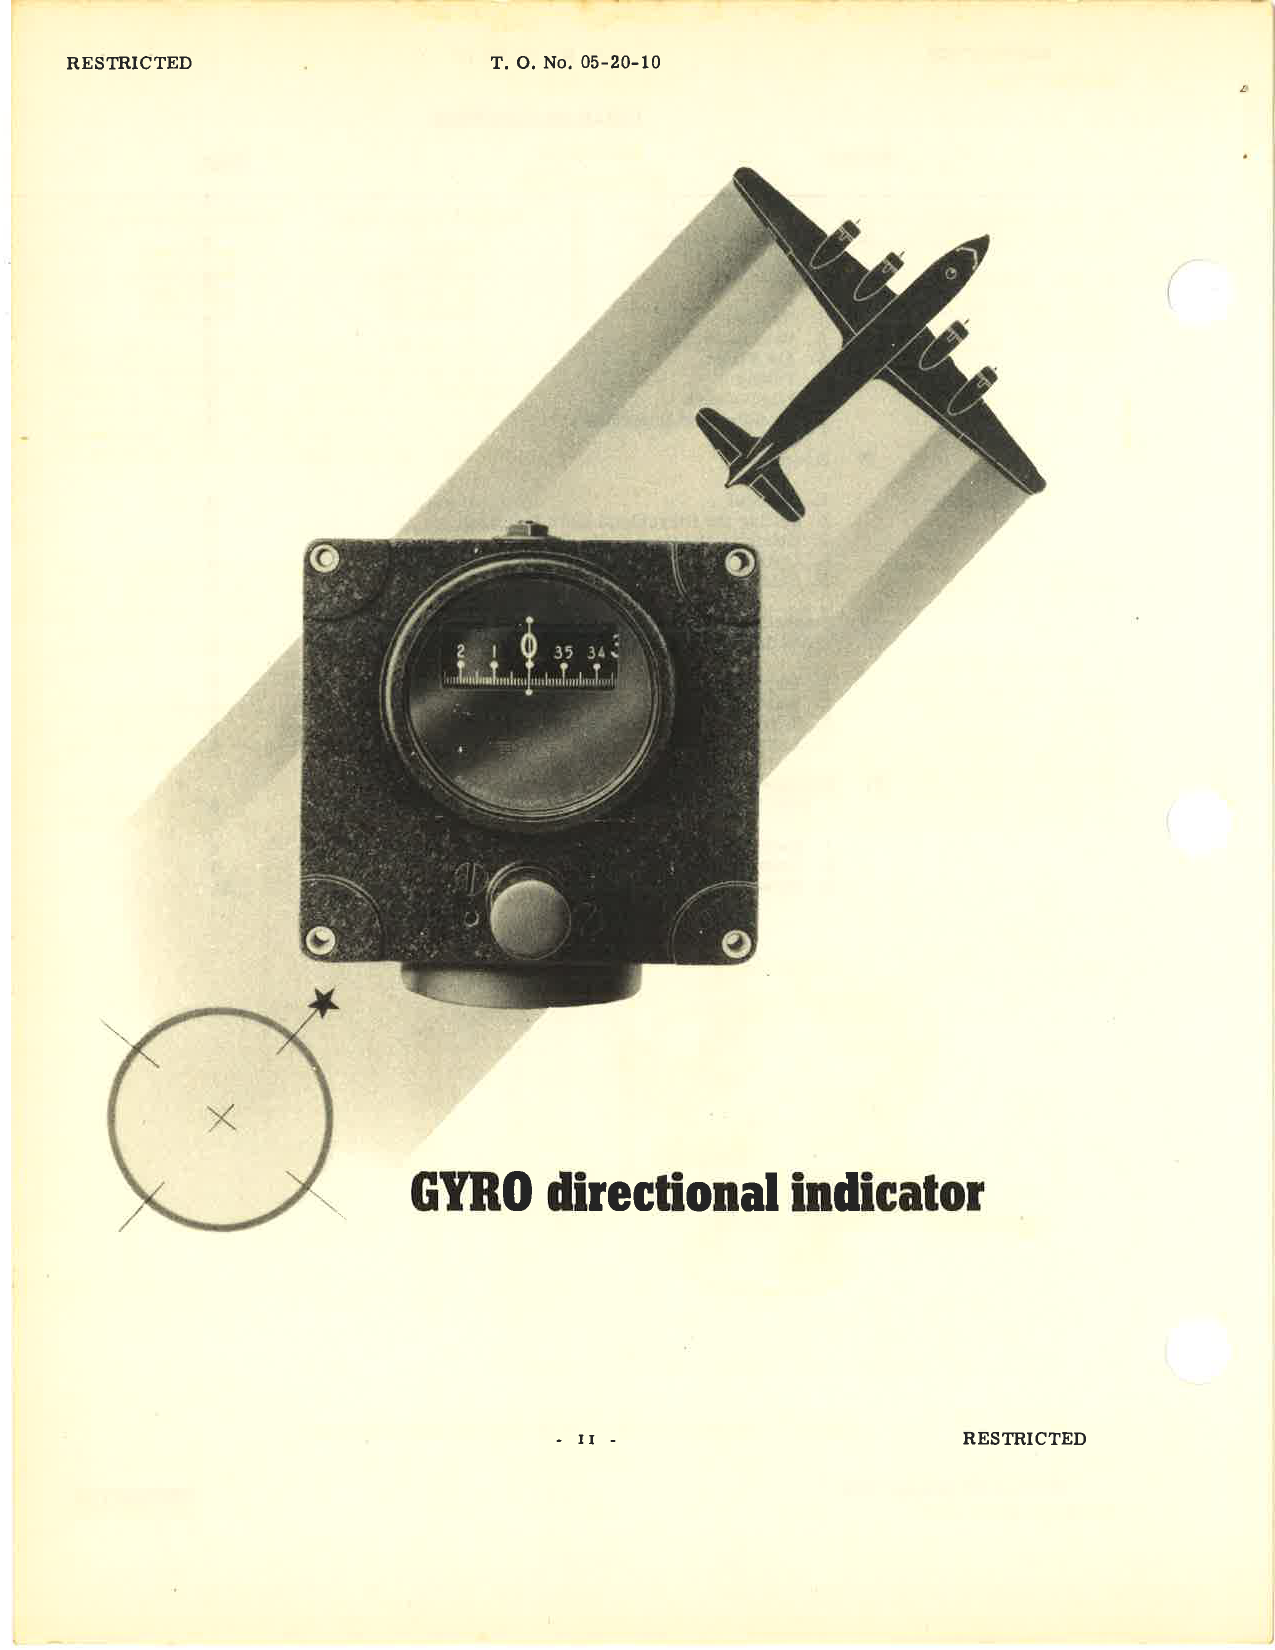 Sample page 6 from AirCorps Library document: Handbook of Instructions with Parts Catalog for Directional Gyro Indicators